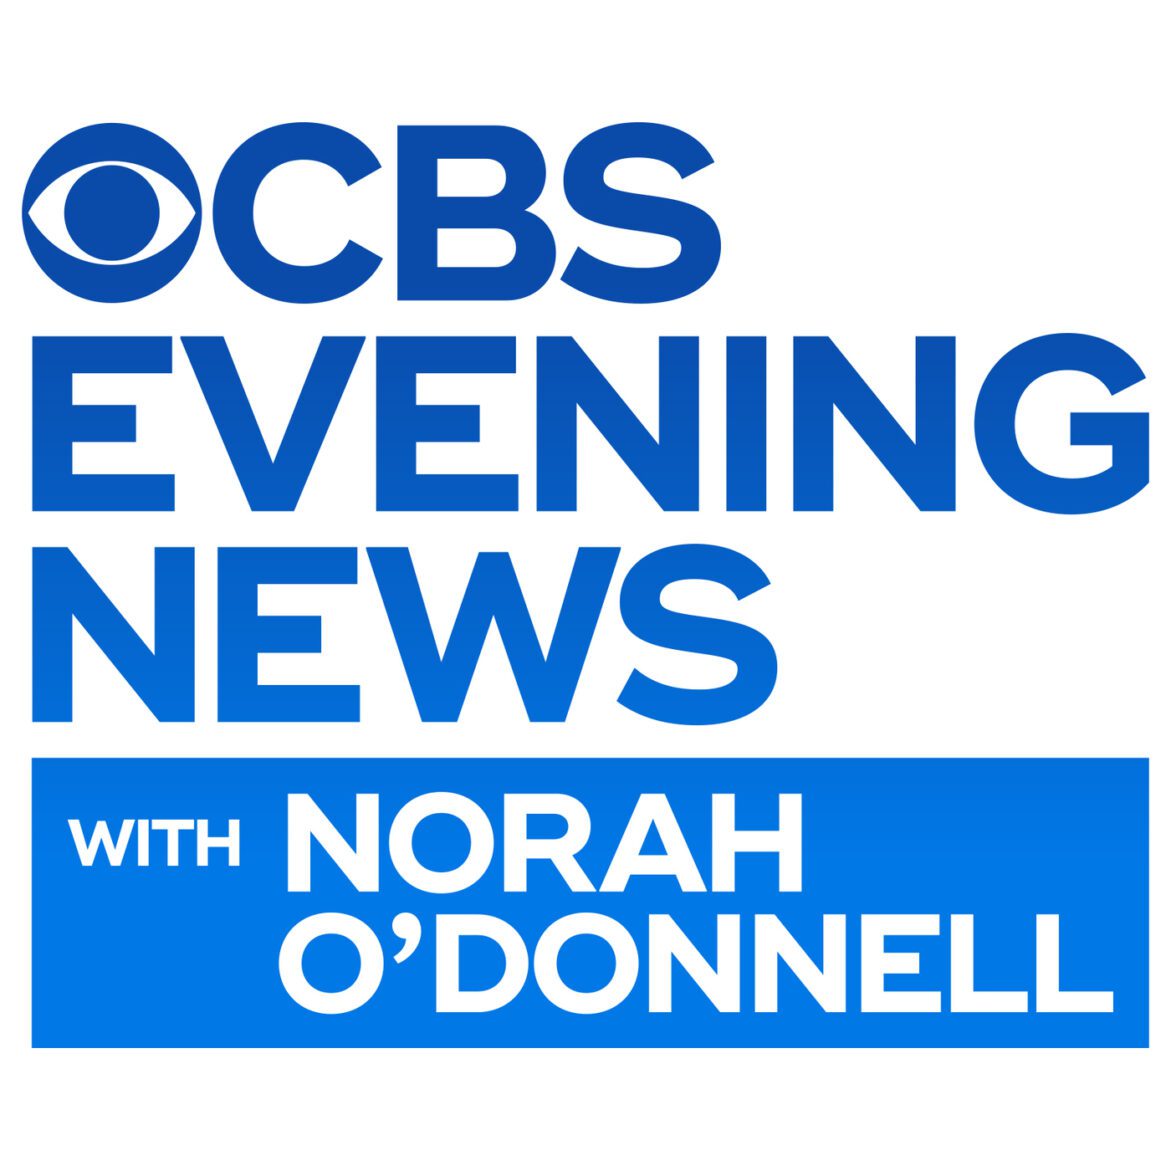 Black Podcasting - CBS Evening News with Norah O'Donnell, 11/23